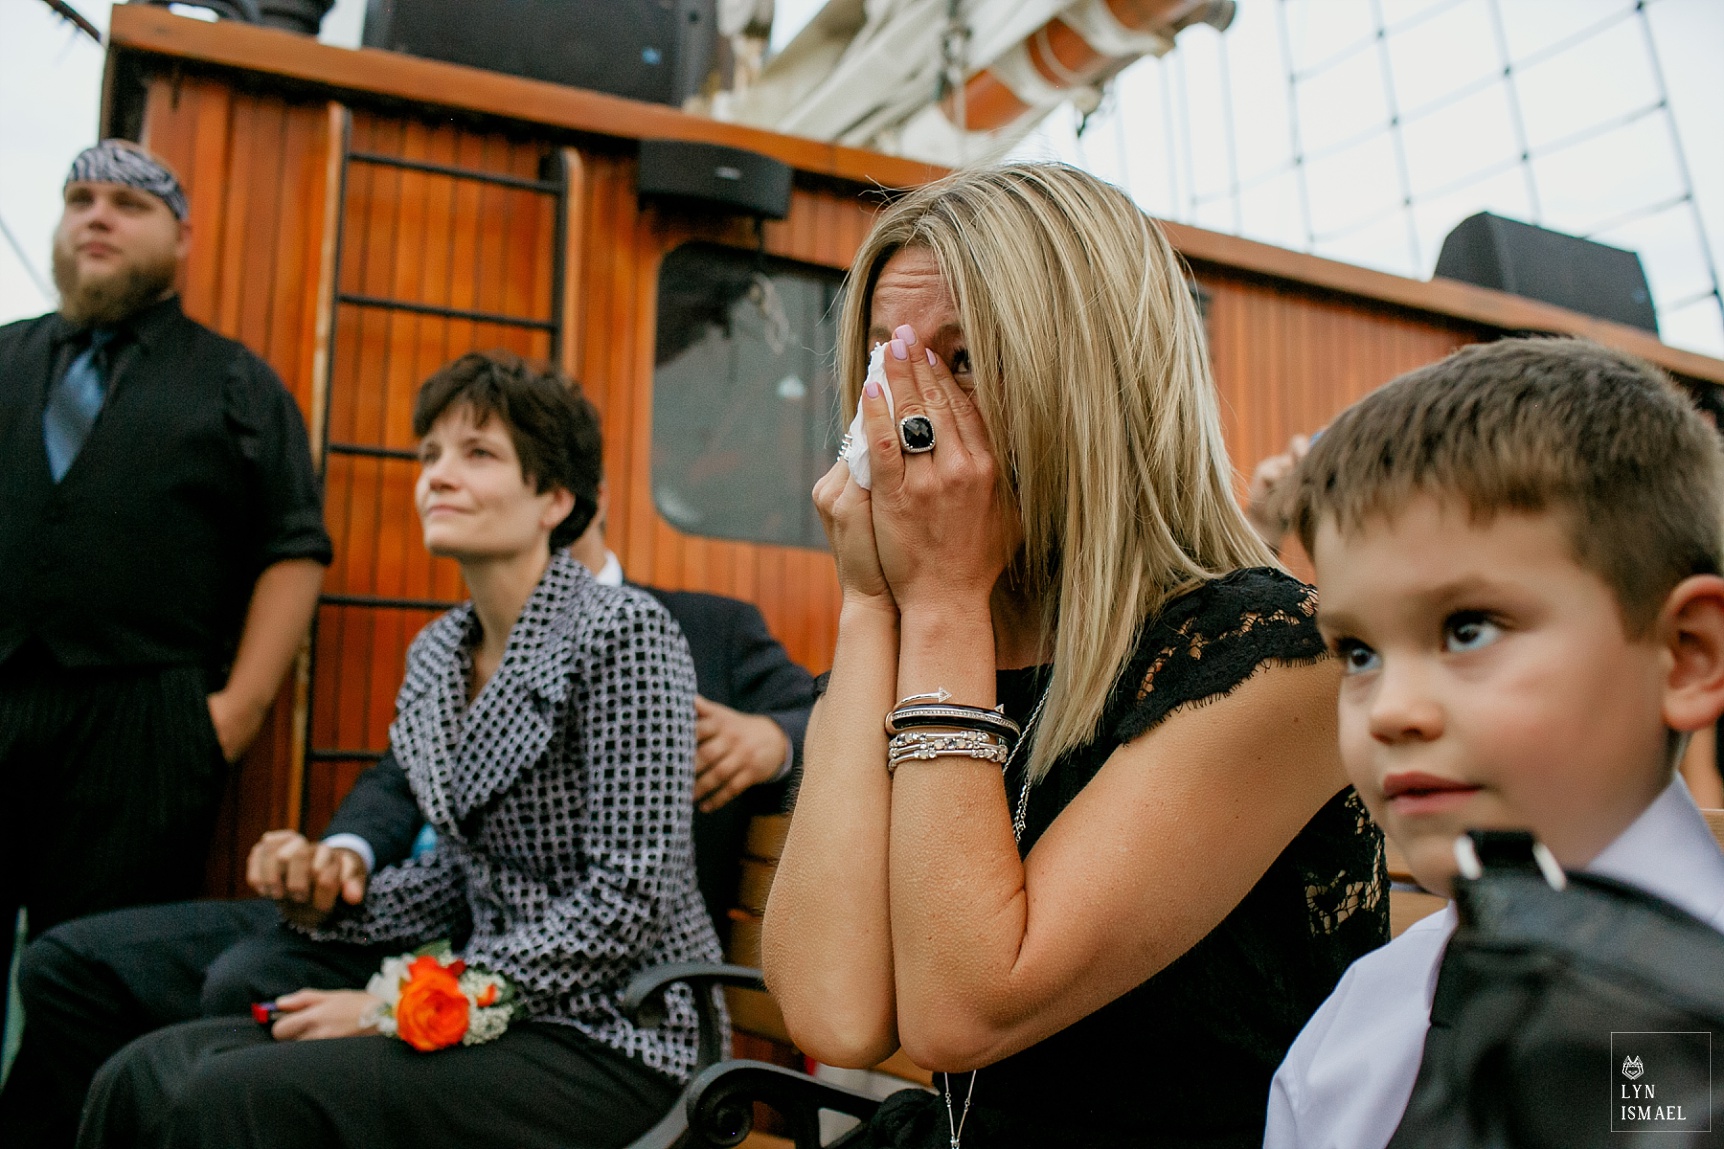 Groom's aunt becomes really emotional listening to the bride and groom's vows aboard the Empire Sandy tall ship.